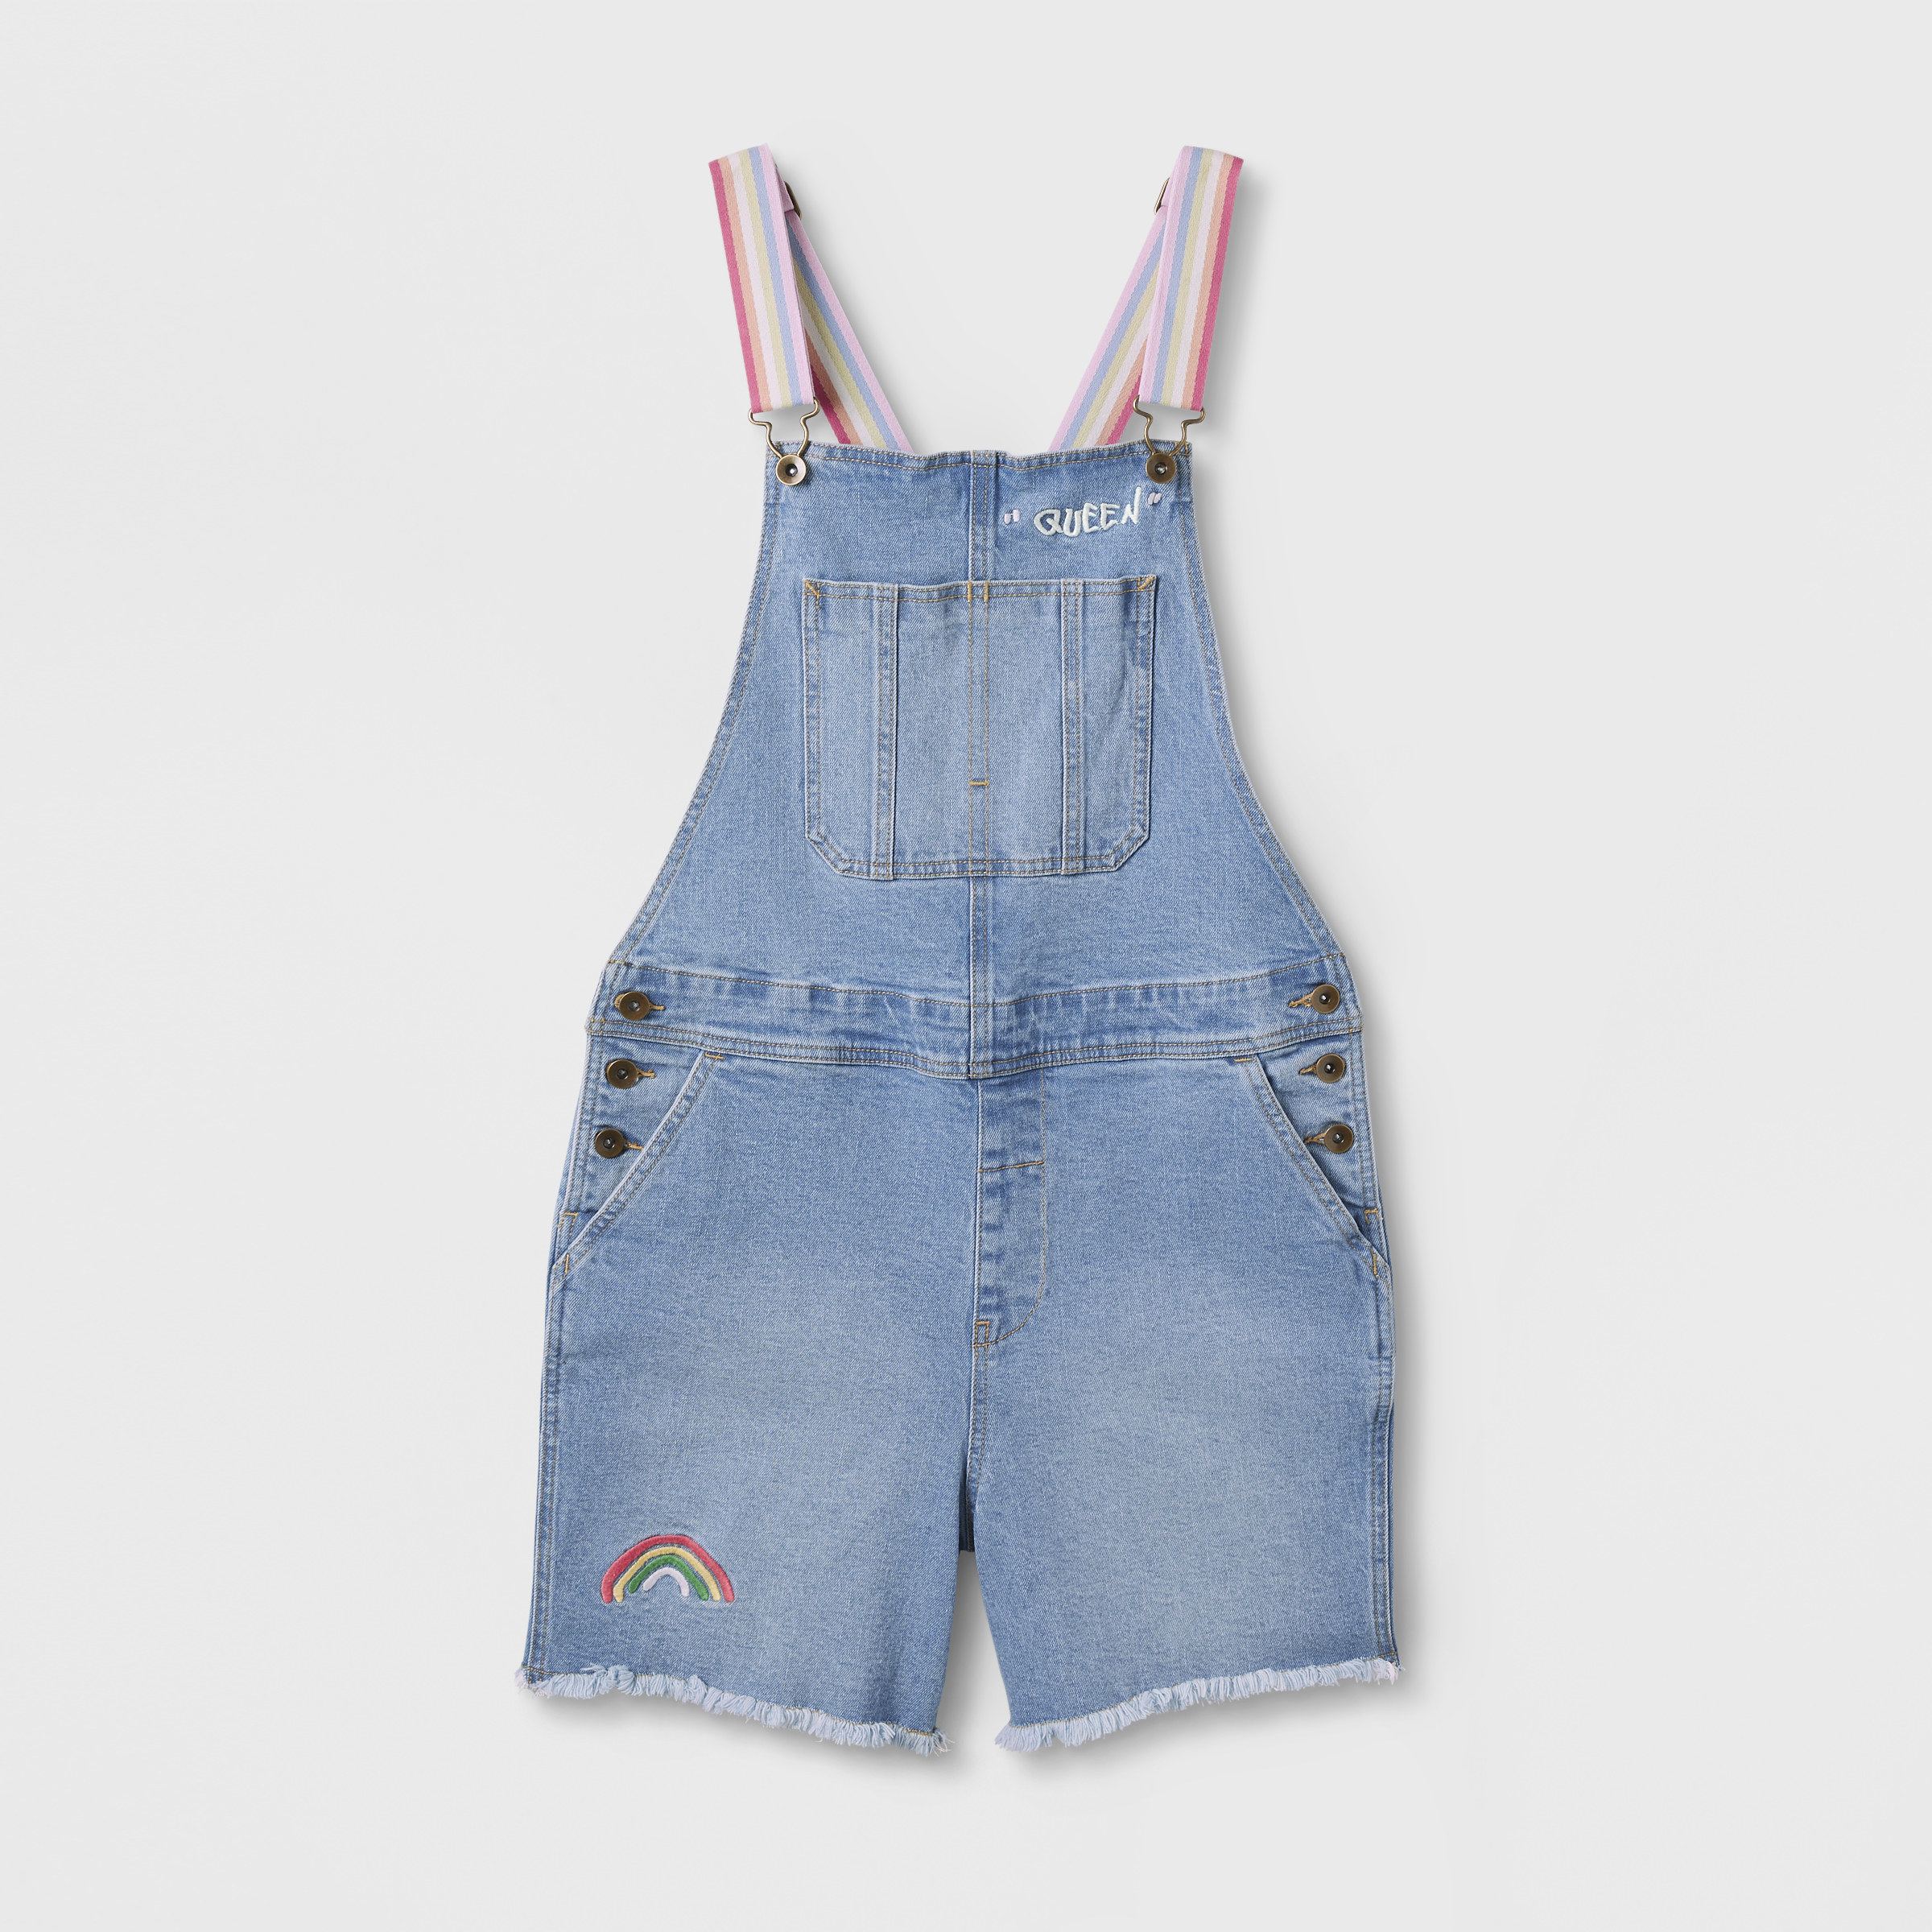 Light Wash Rainbow Shortalls with a rainbow and &quot;queen&quot; embroidered on the front